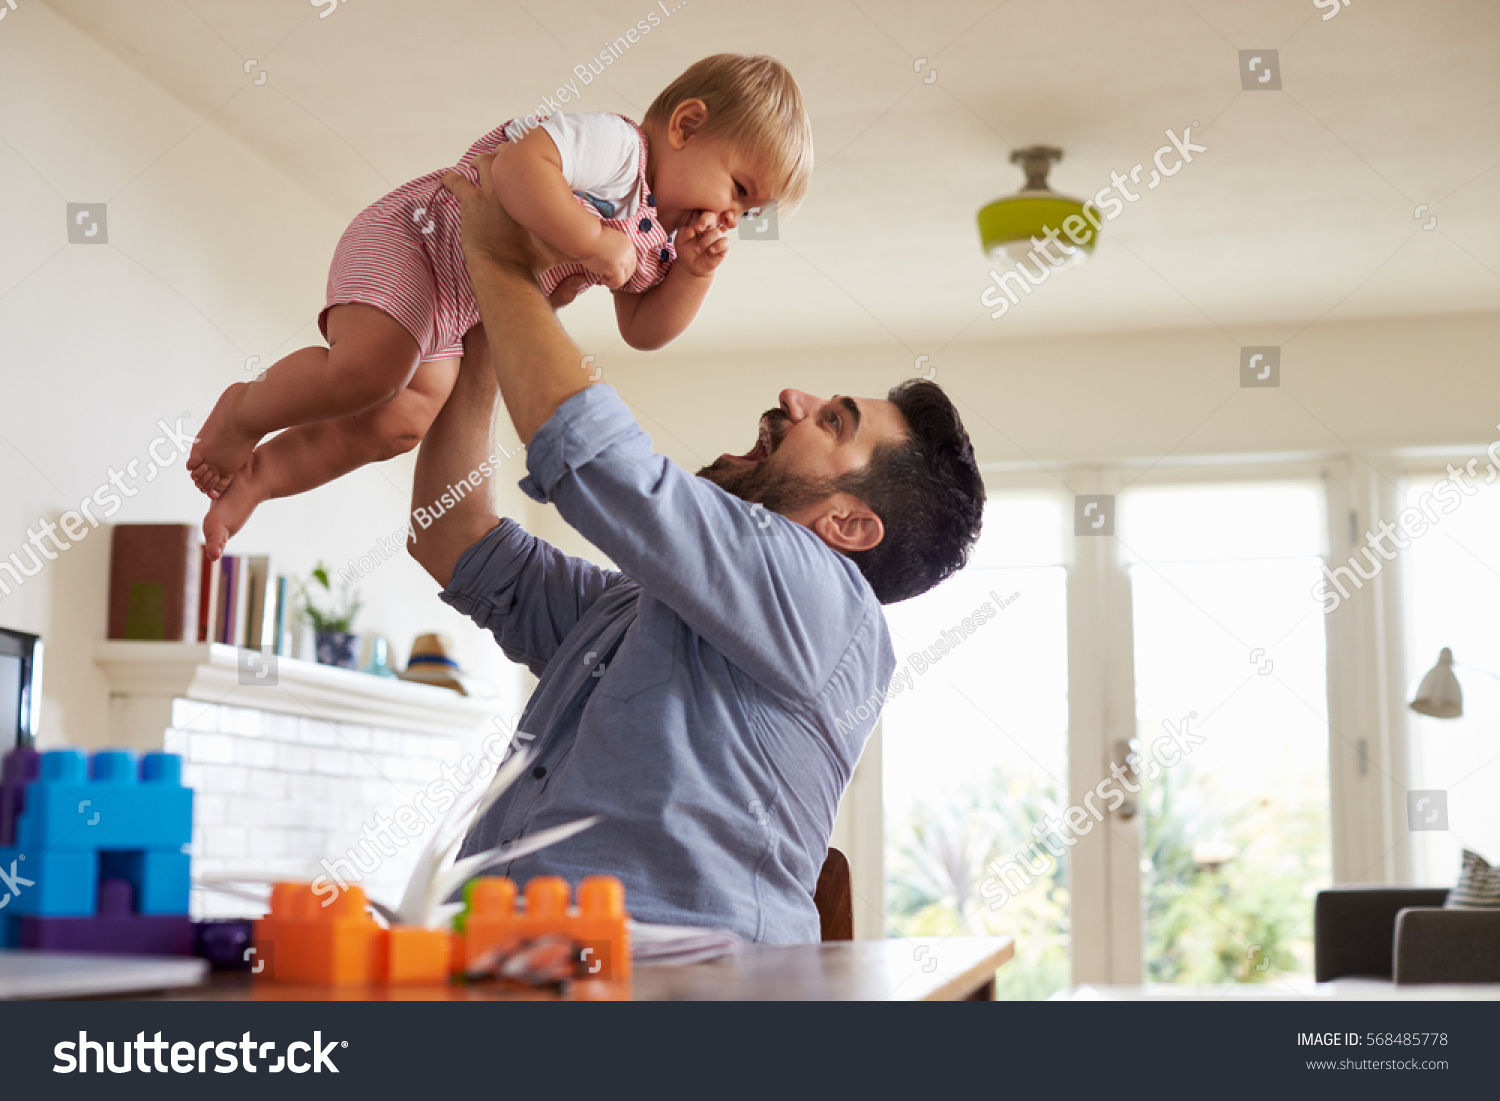 Father Sits At Table And Plays With Baby Son At Home #568485778